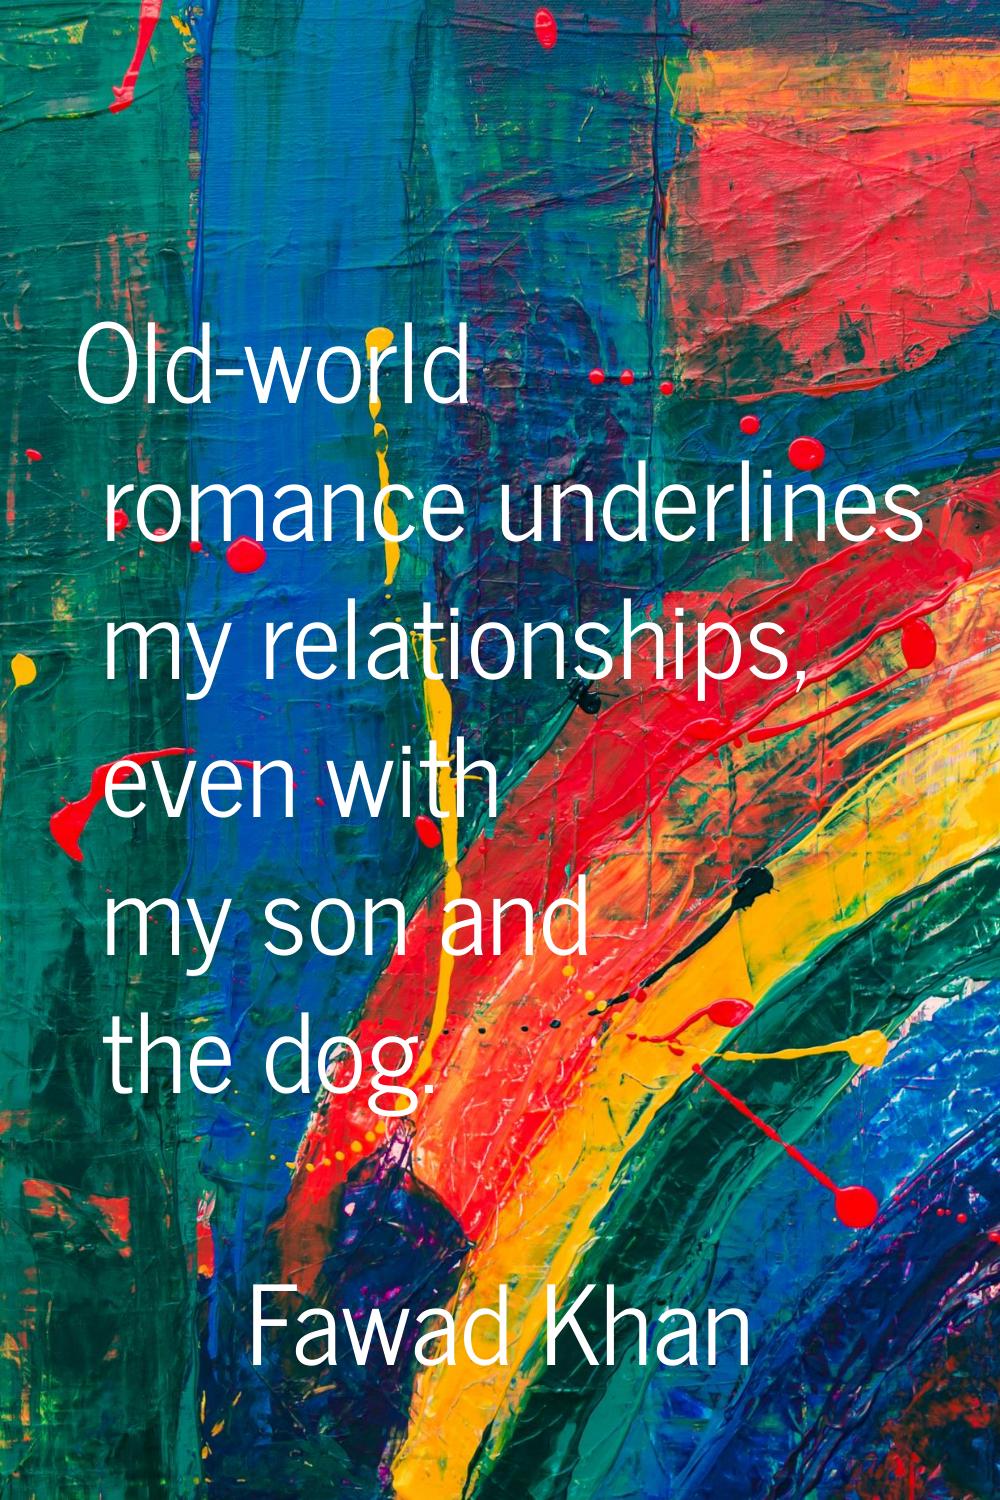 Old-world romance underlines my relationships, even with my son and the dog.